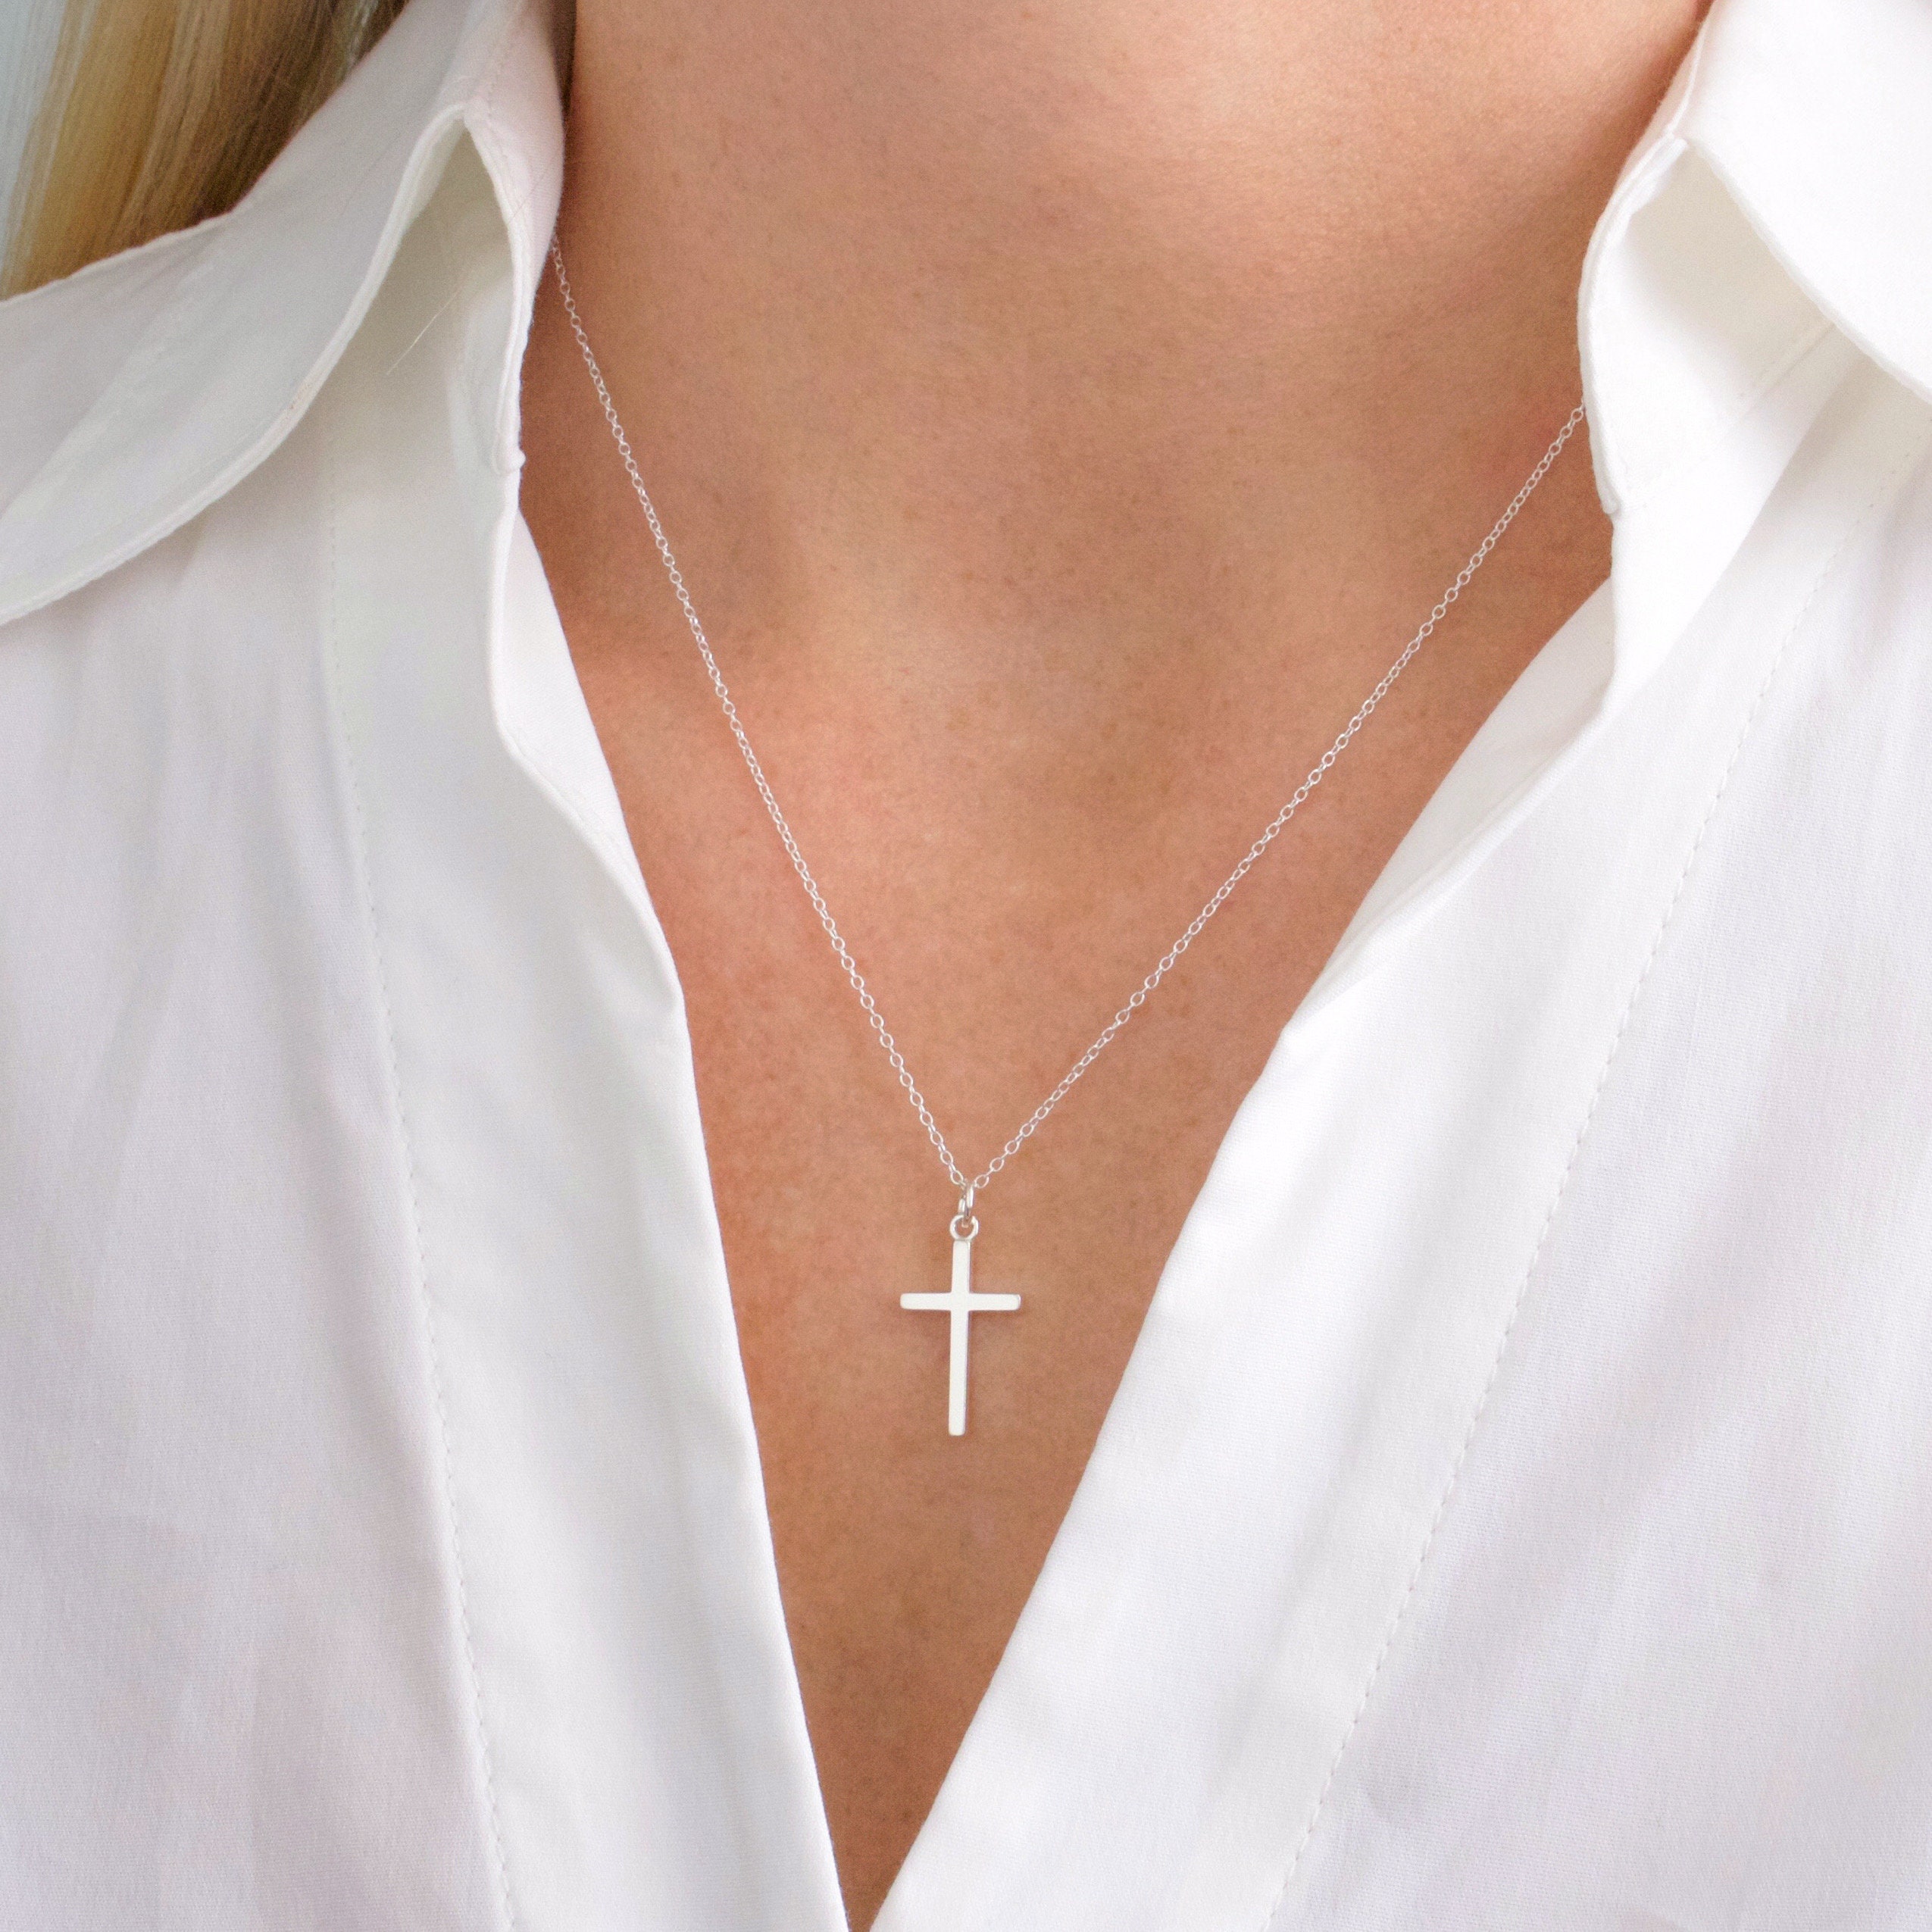 Large Solid Silver Cross Necklace with Engraving | Charming Engraving